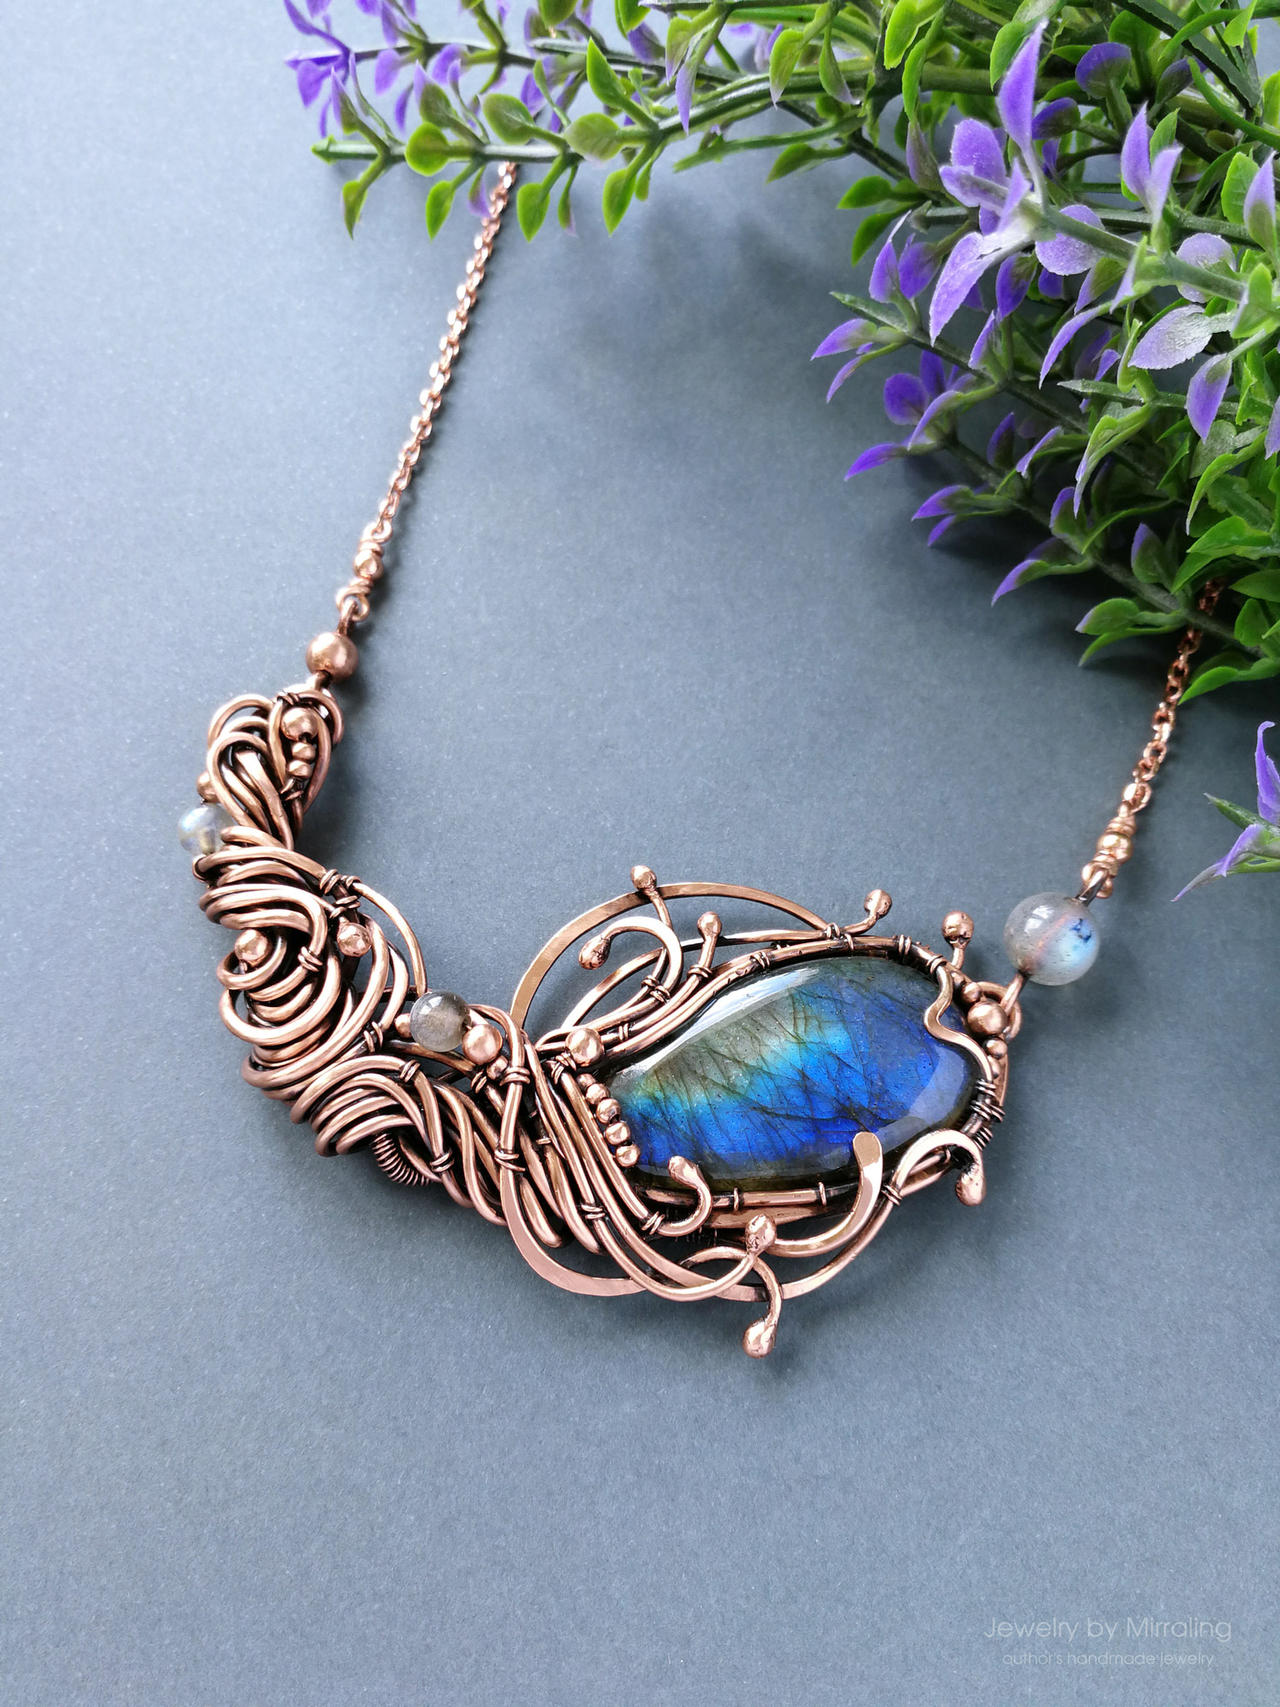 Floral necklace with blue labradorite by mirraling on DeviantArt